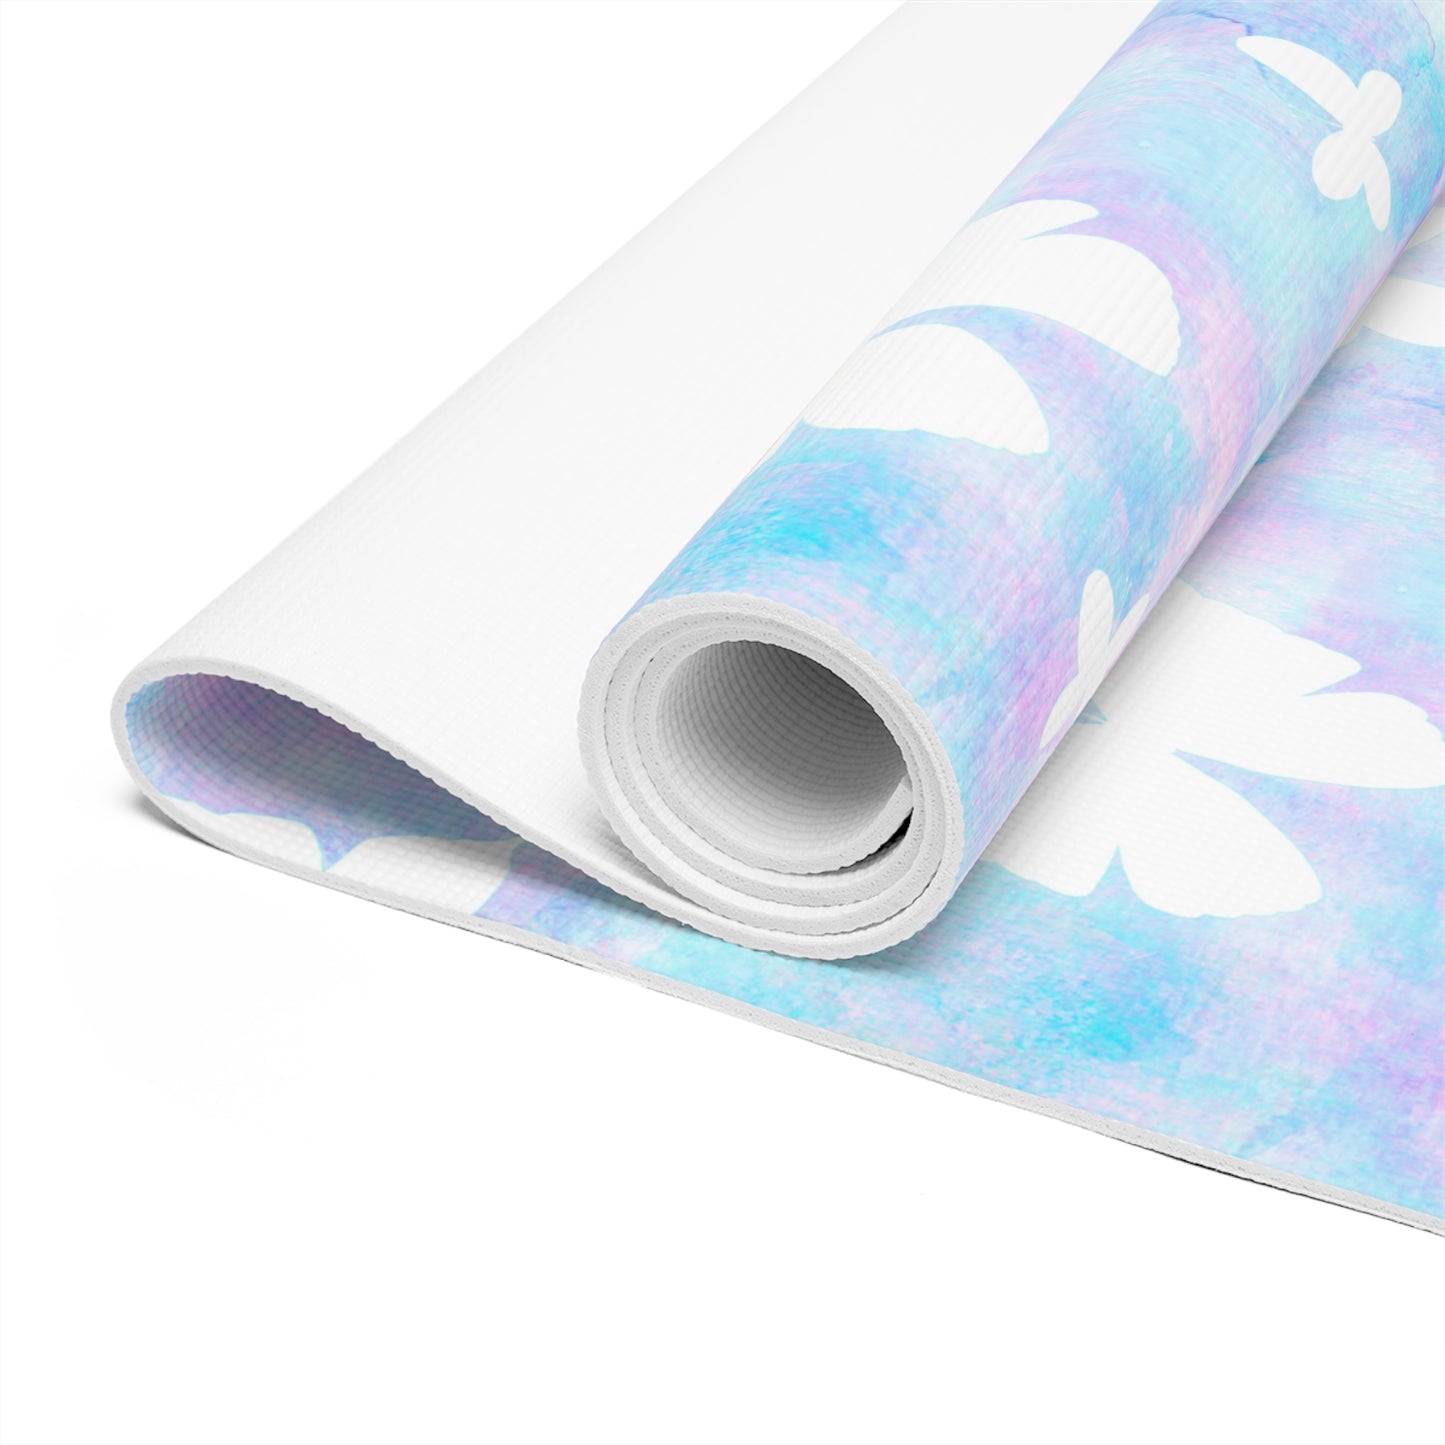 Pastel Butterflies Foam Yoga Mat, Foam Material, Lightweight, and Can Cushion You From Impacts